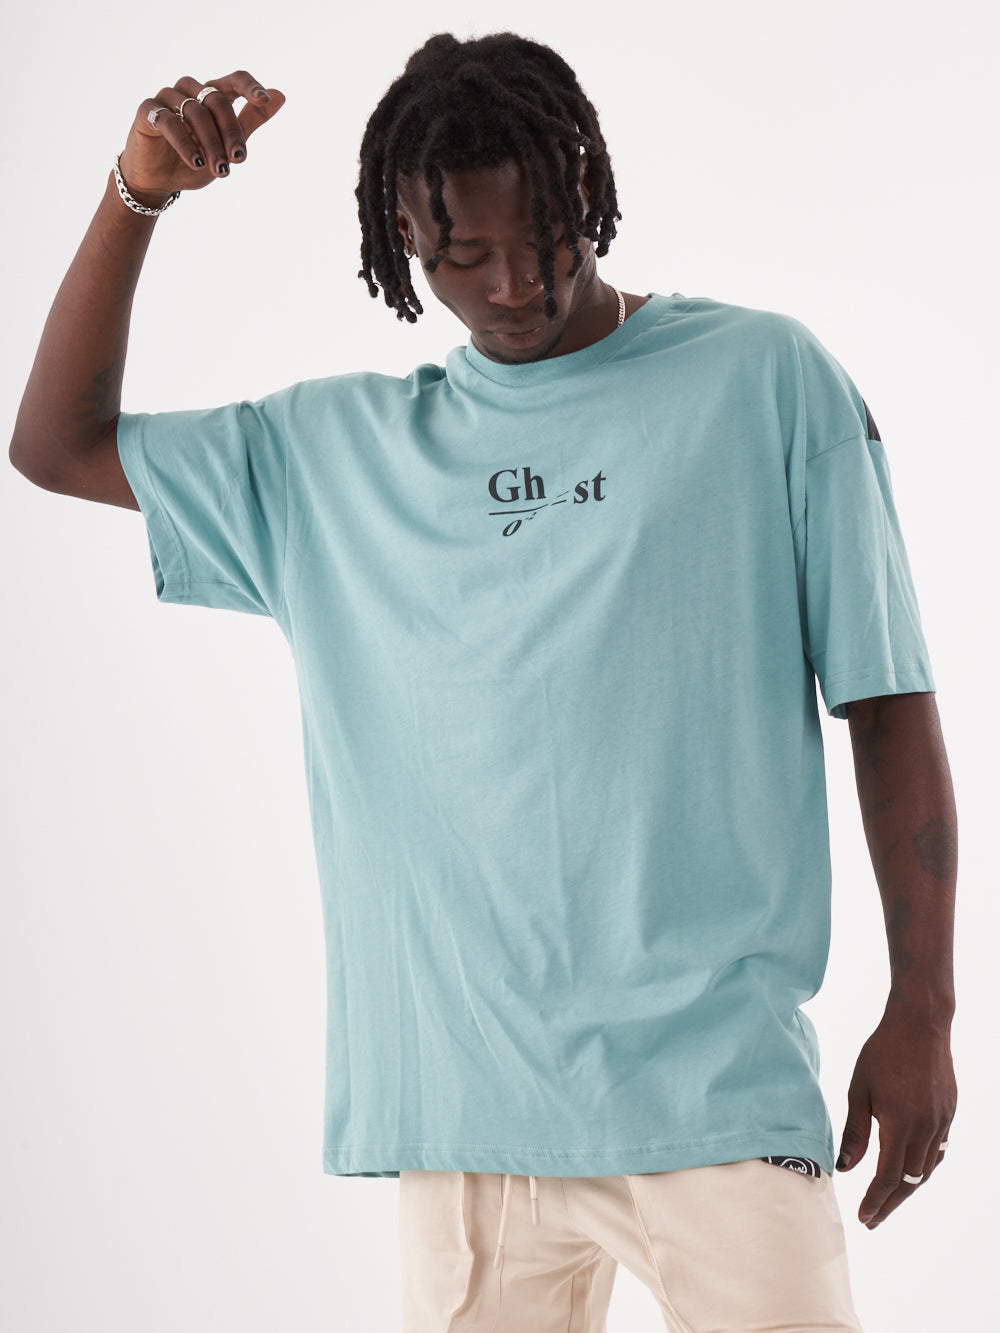 A man wearing a blue Ghost T-shirt with the word gi on it.